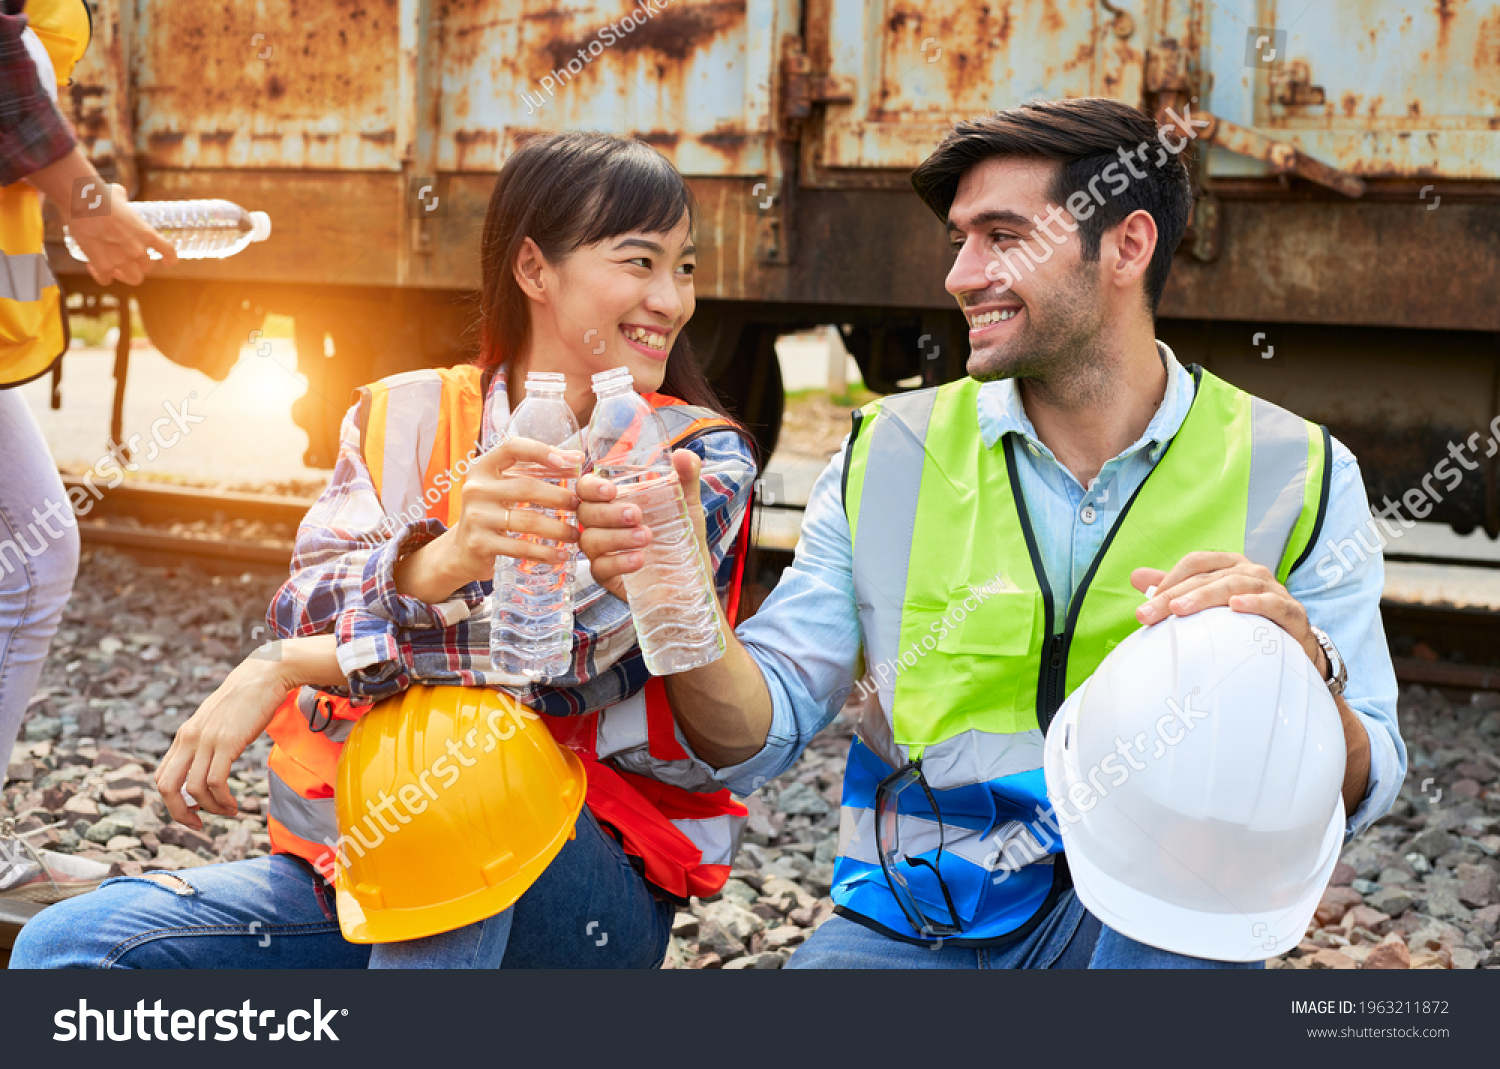 Industrial workers or Rail transport engineers in protective clothing are drinking water to quench their thirst beside the freight train after working hard during the day outdoors. #1963211872